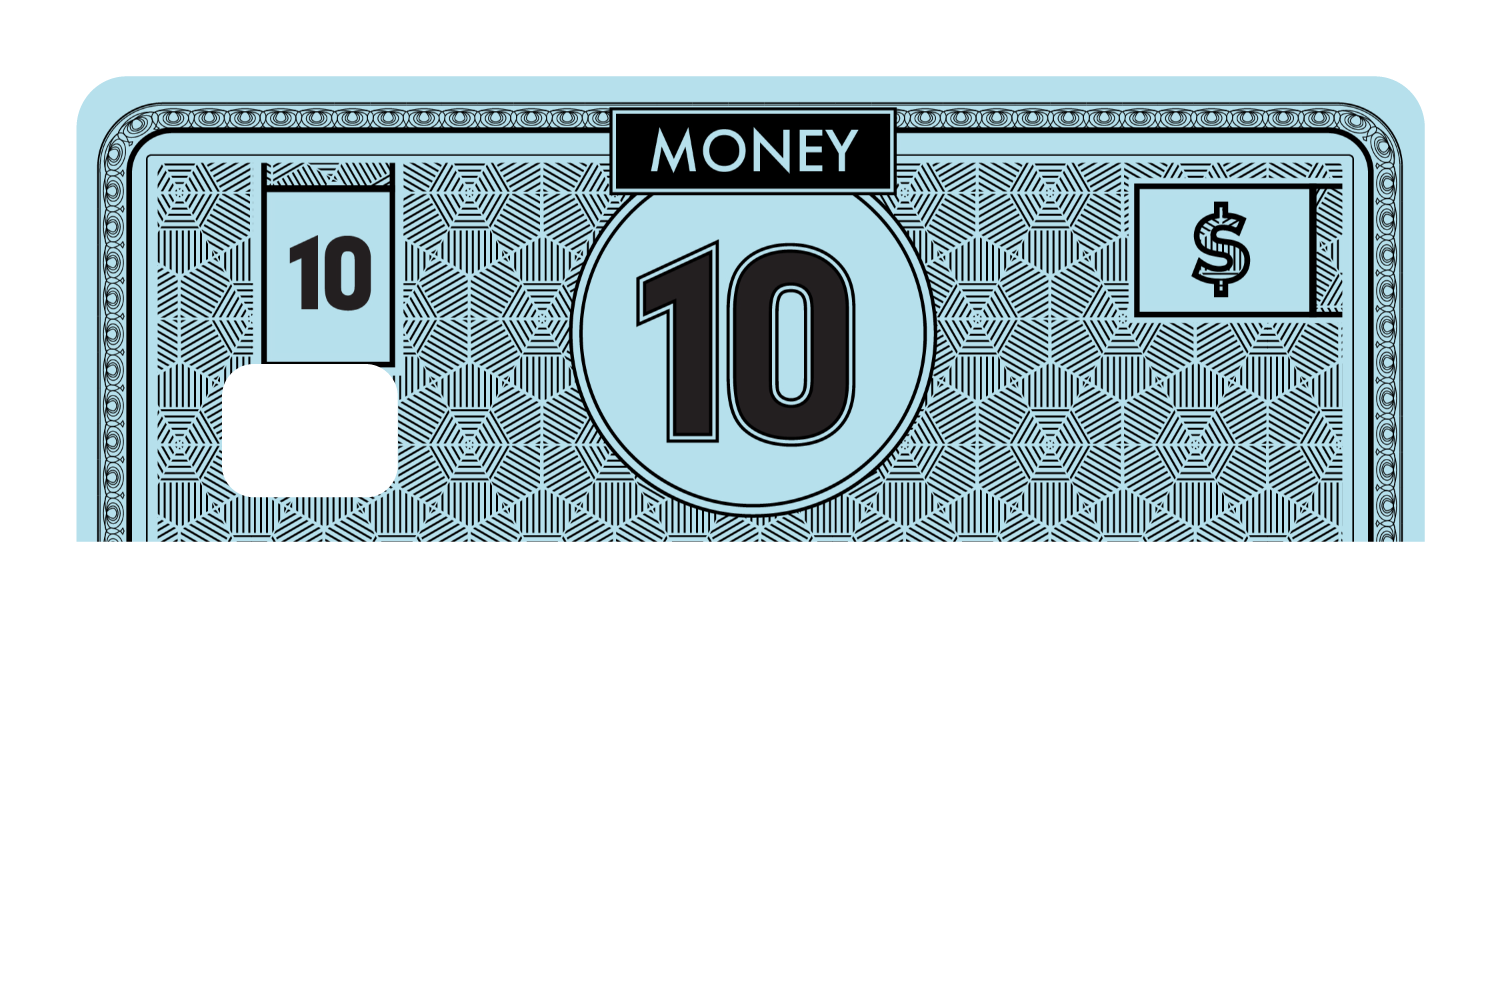 $10 Note